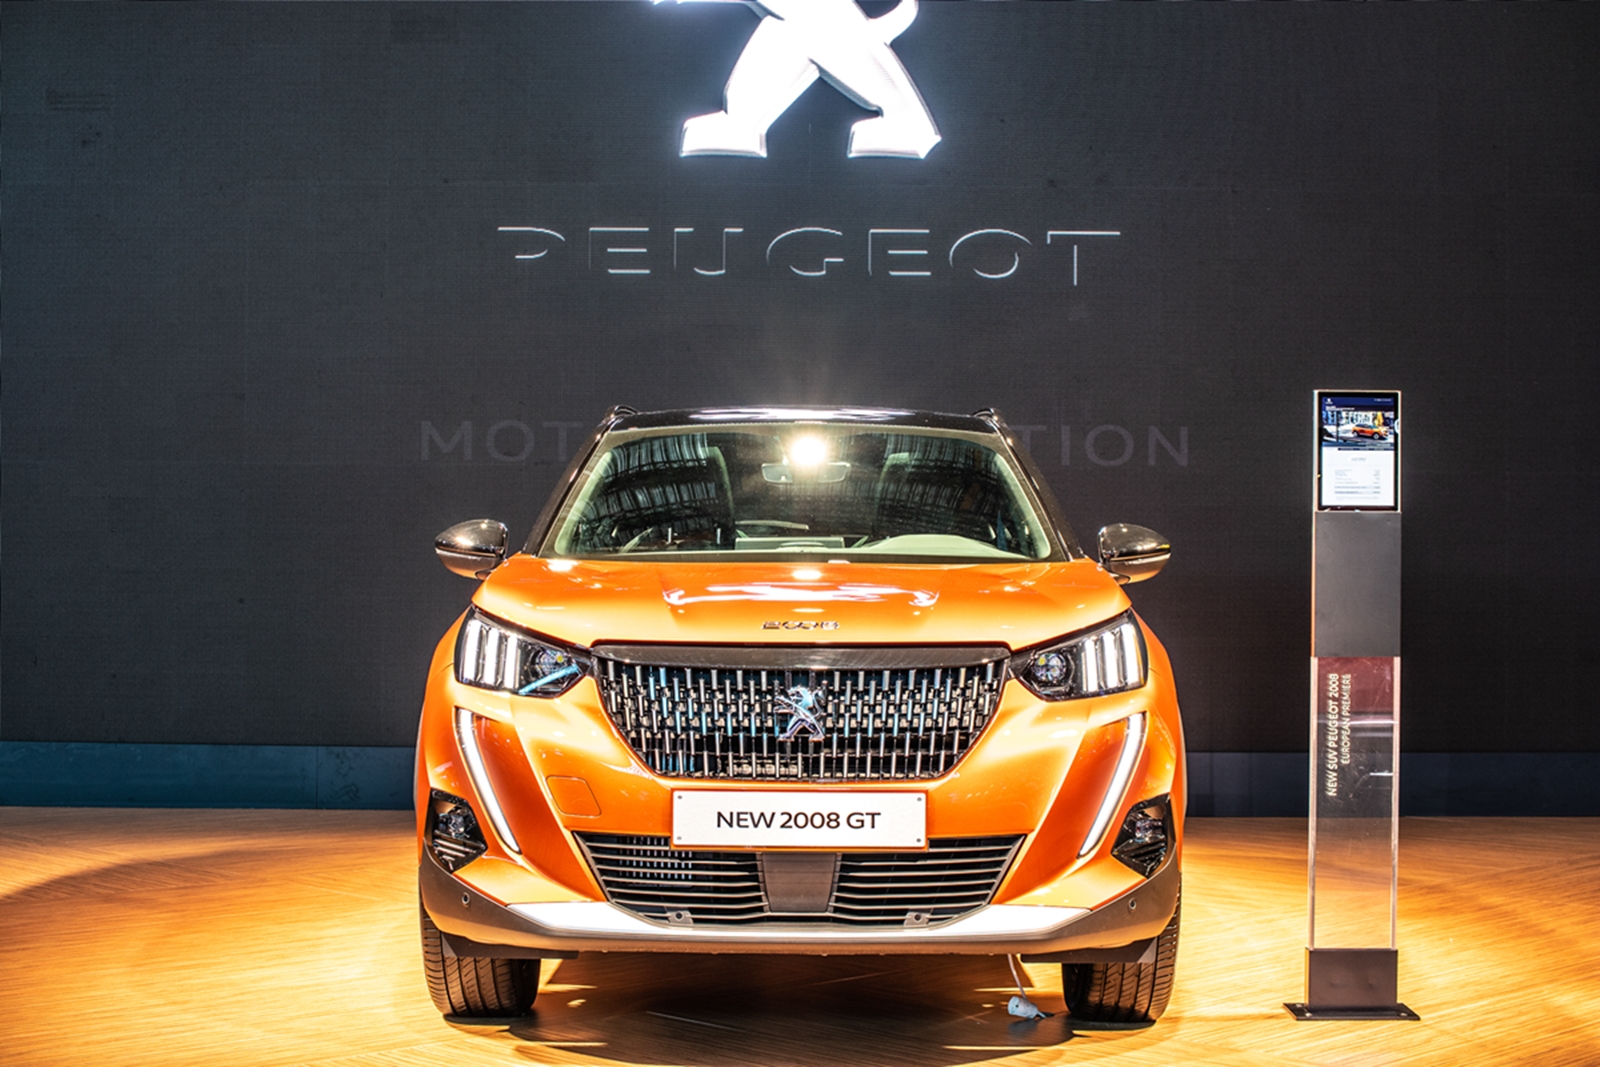 Peugeot 2008: First locally assembled European SUV in Pakistan